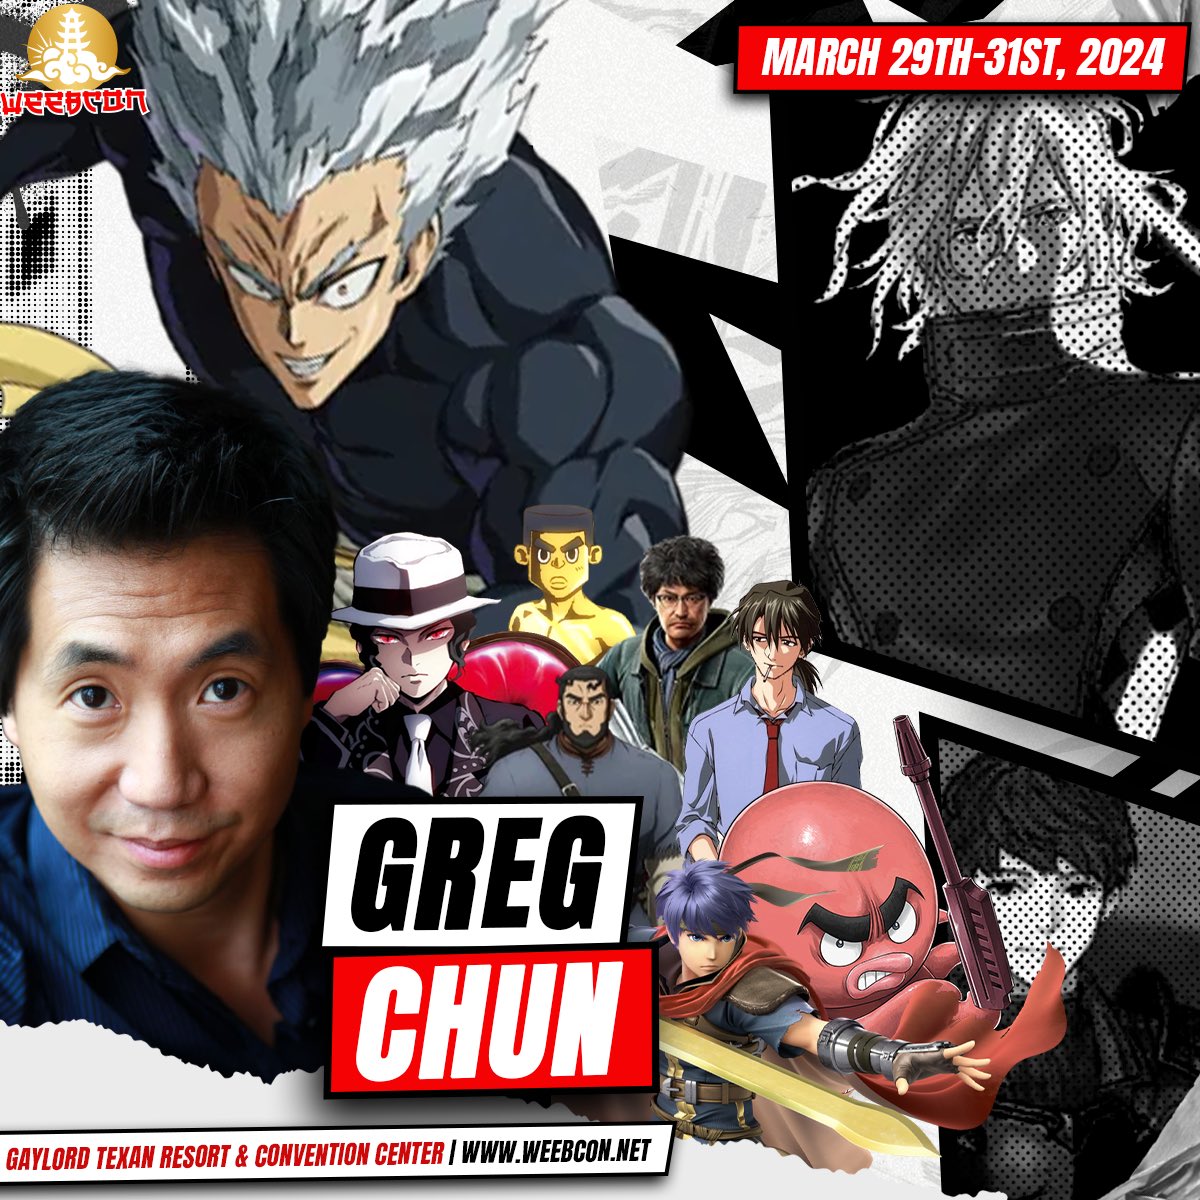 ⛅️CELEBRITY GUEST⛅️ Where you have Saitama, Garou is somewhere close hatin. Please welcome Greg Chun to our guest lineup! Greg will be in attendance all three days of the show. Which starts in 3 days by the way ⛅️